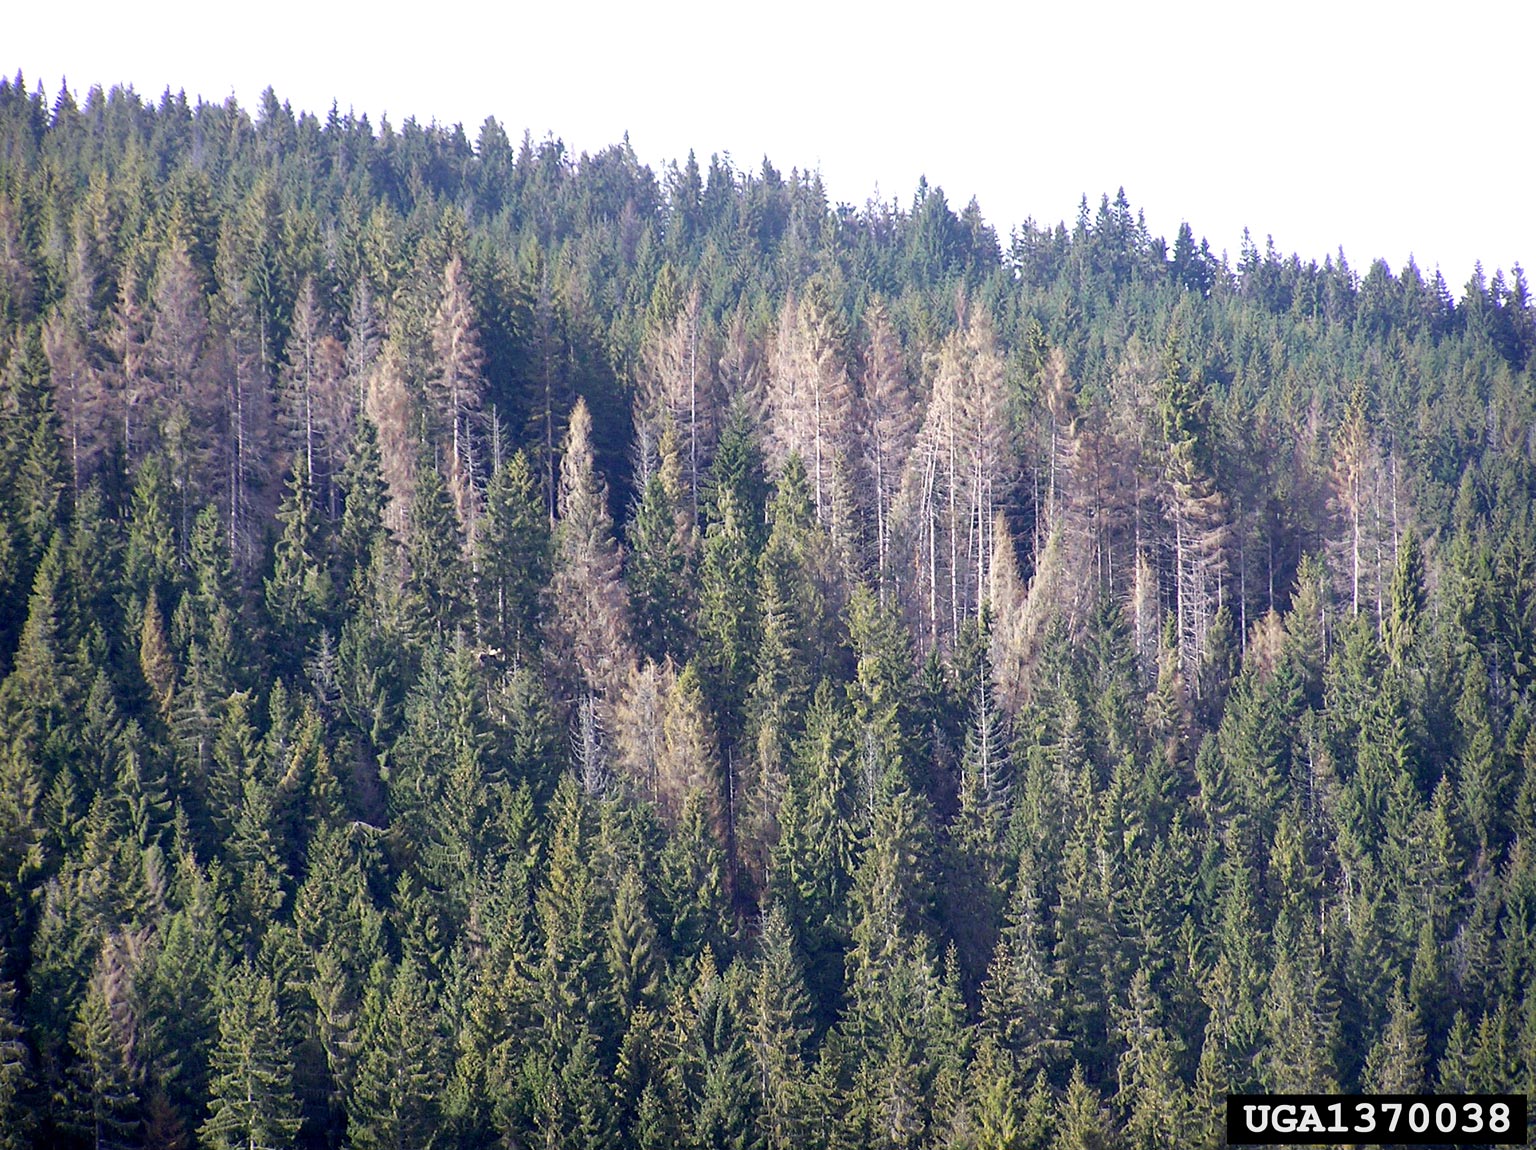 Spruce trees affected by Ips typographus